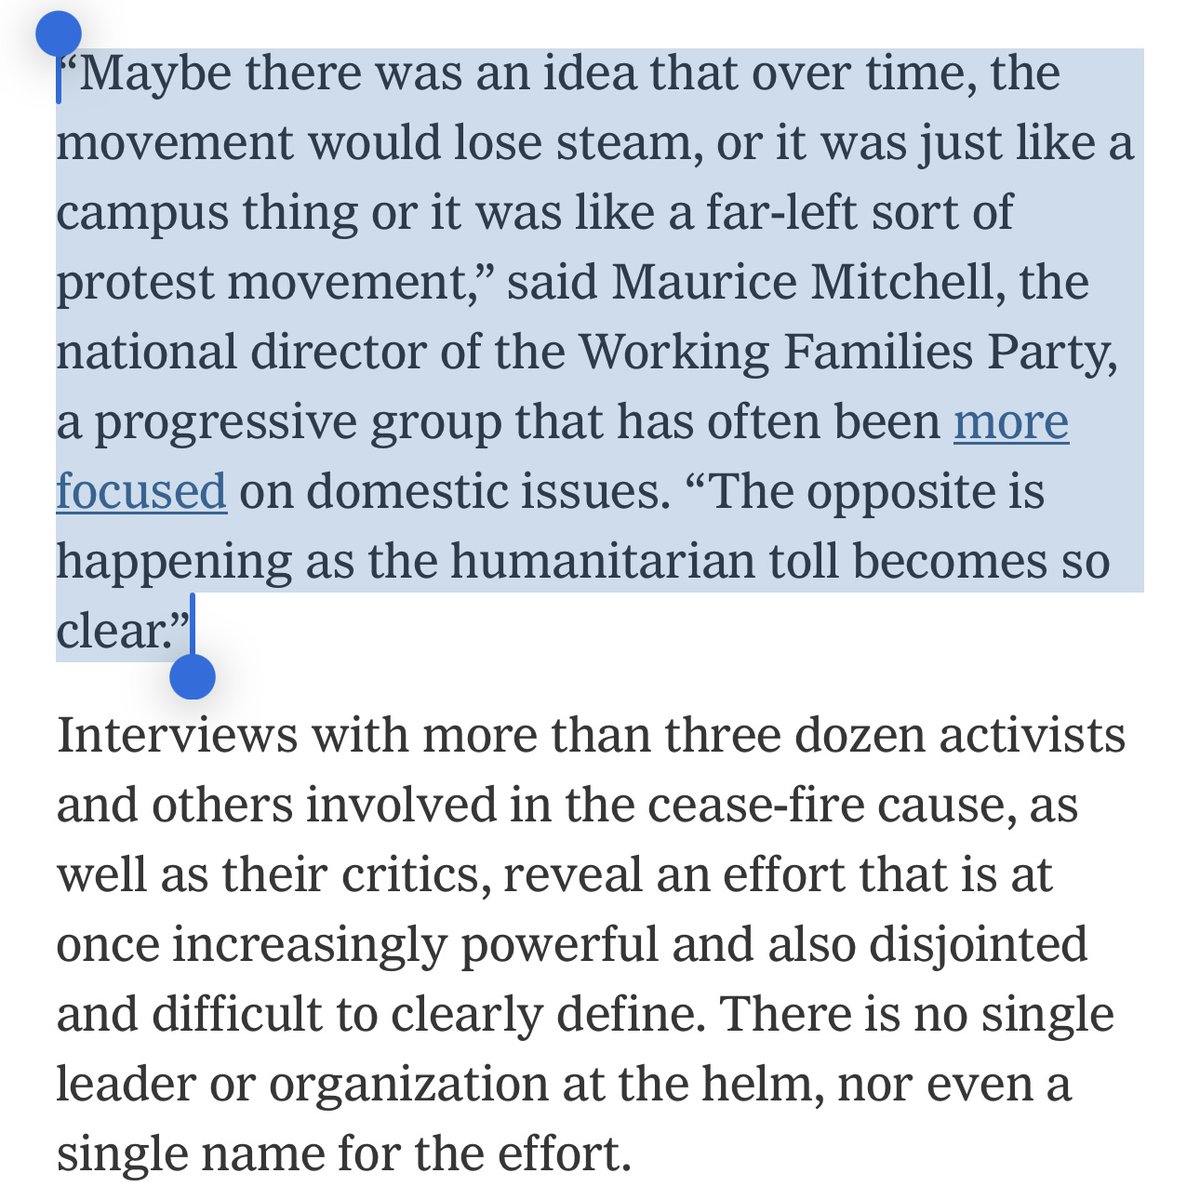 What was once thought of as a “far-left protest movement” has become a national mobilization with 85 members of Congress (and counting!) and millions around the world demanding a ceasefire. Let’s be clear on why: our organizing is working.